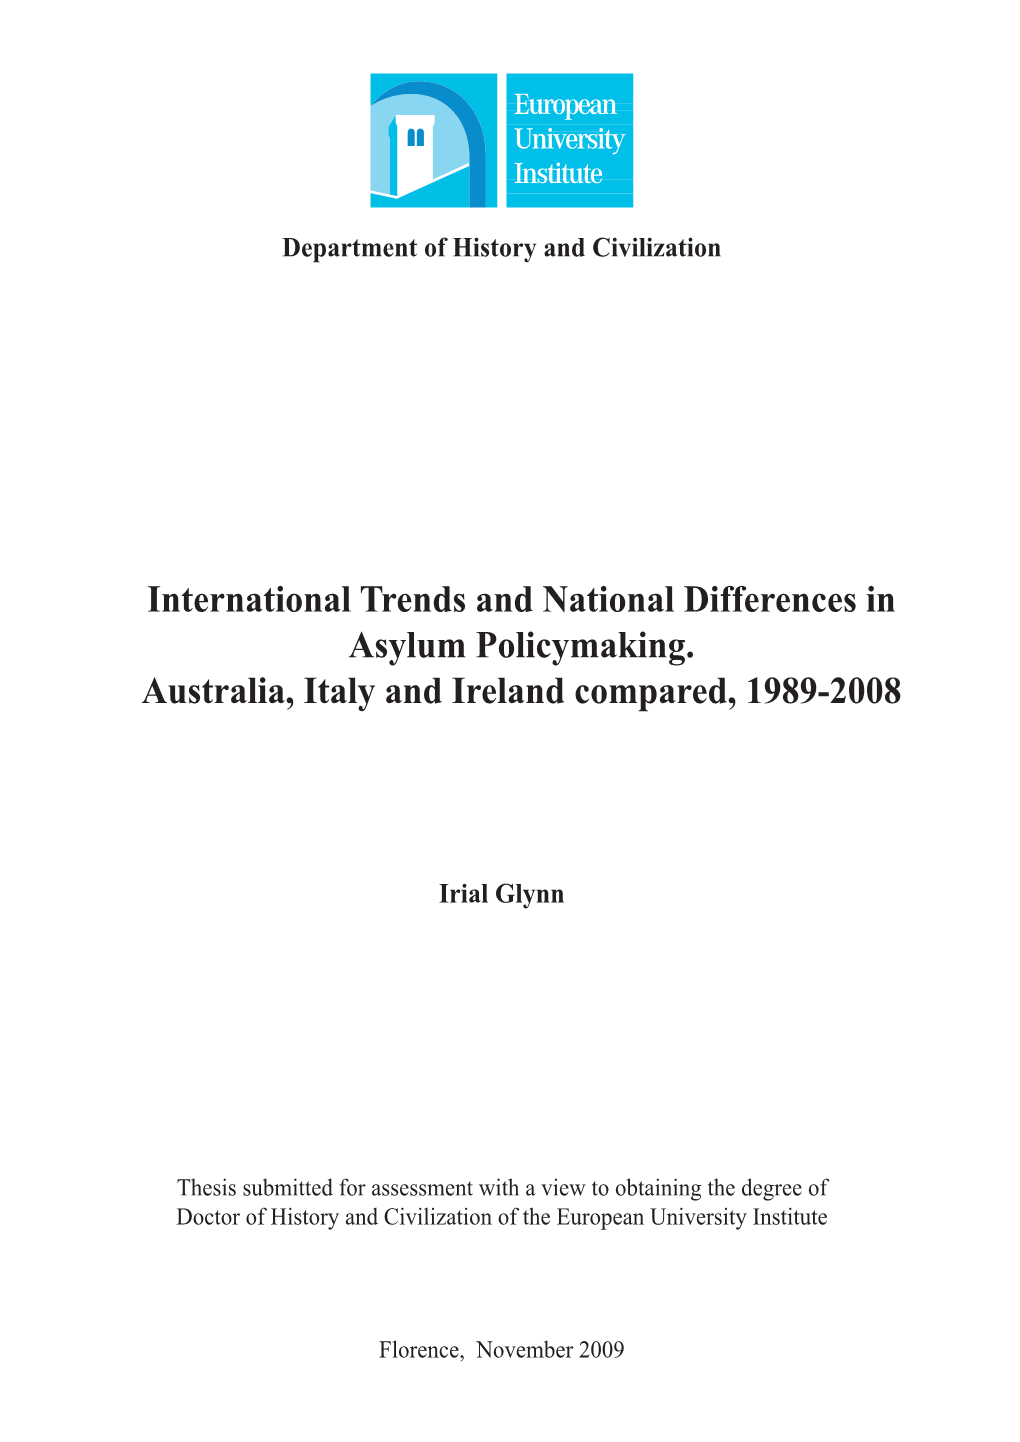 International Trends and National Differences in Asylum Policymaking